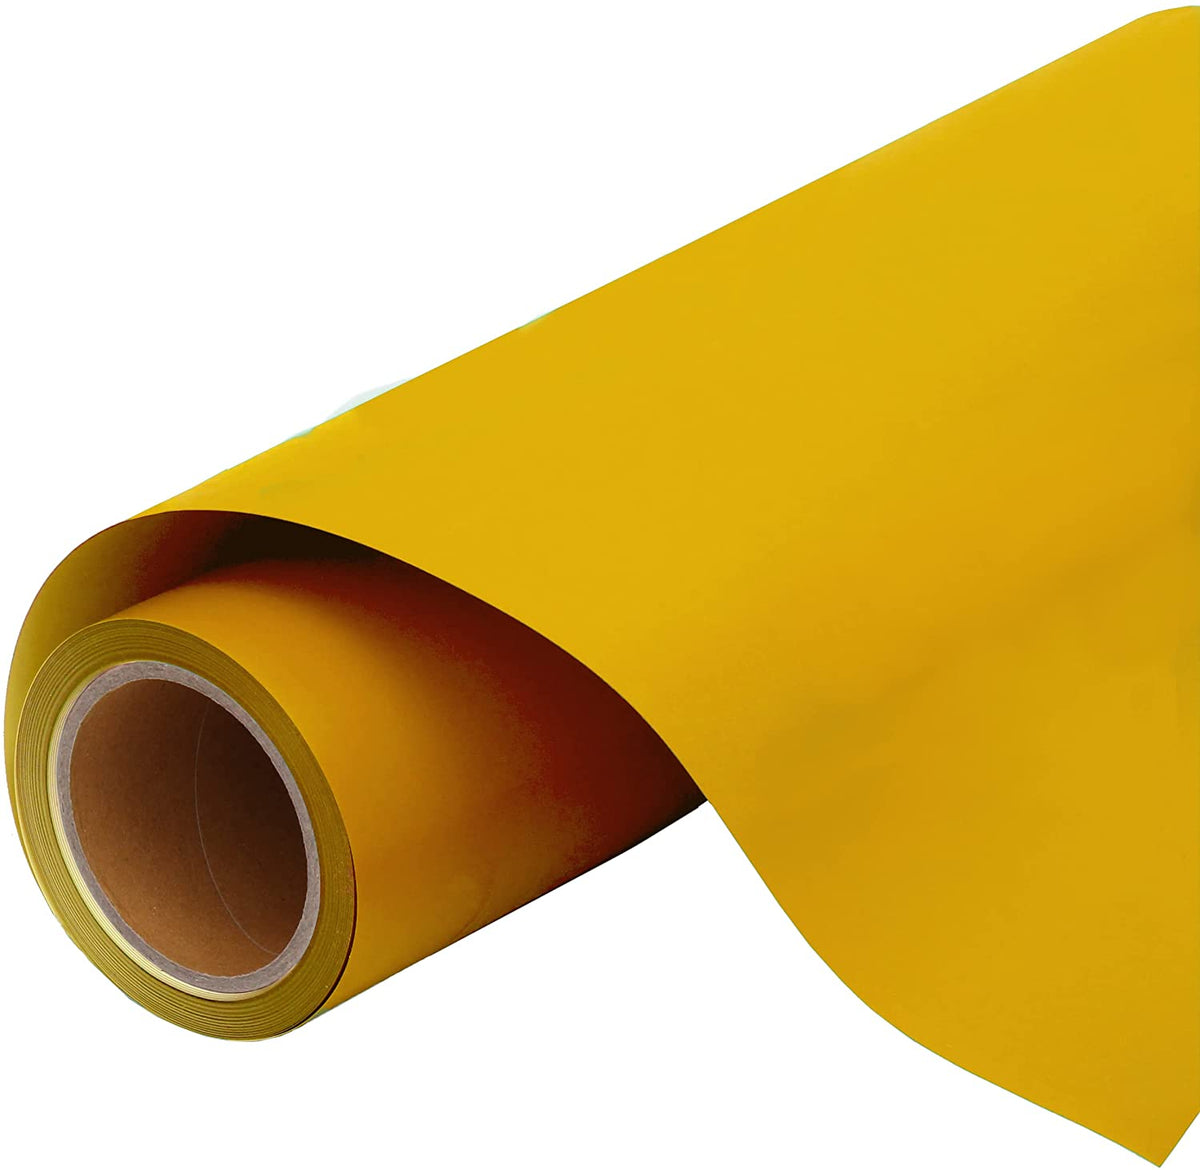 HTV Heat Transfer Vinyl Roll - 12 x 40 Yellow HTV Vinyl for Shirts - Easy  to Cut & Weed Silver Iron on Vinyl for Clothes - Yellow 